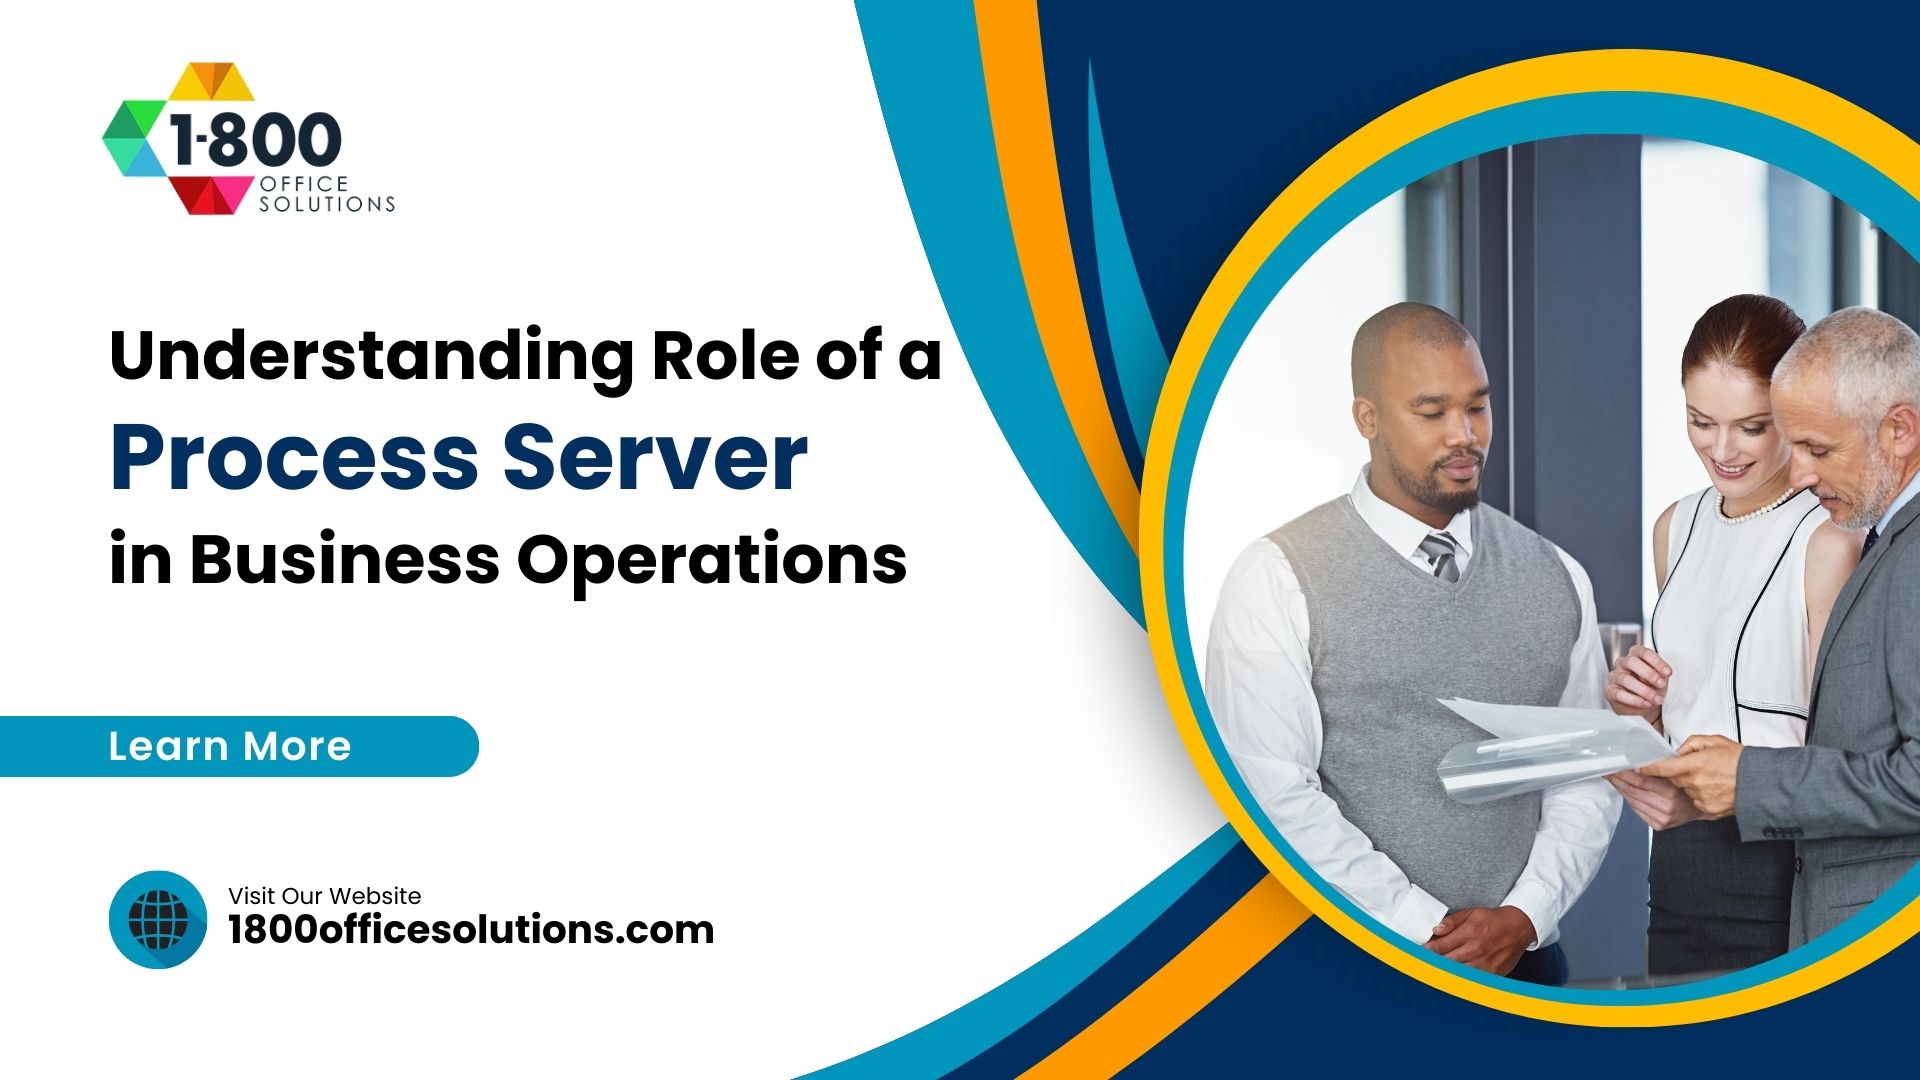 Understanding the Role of a Process Server in Business Operations